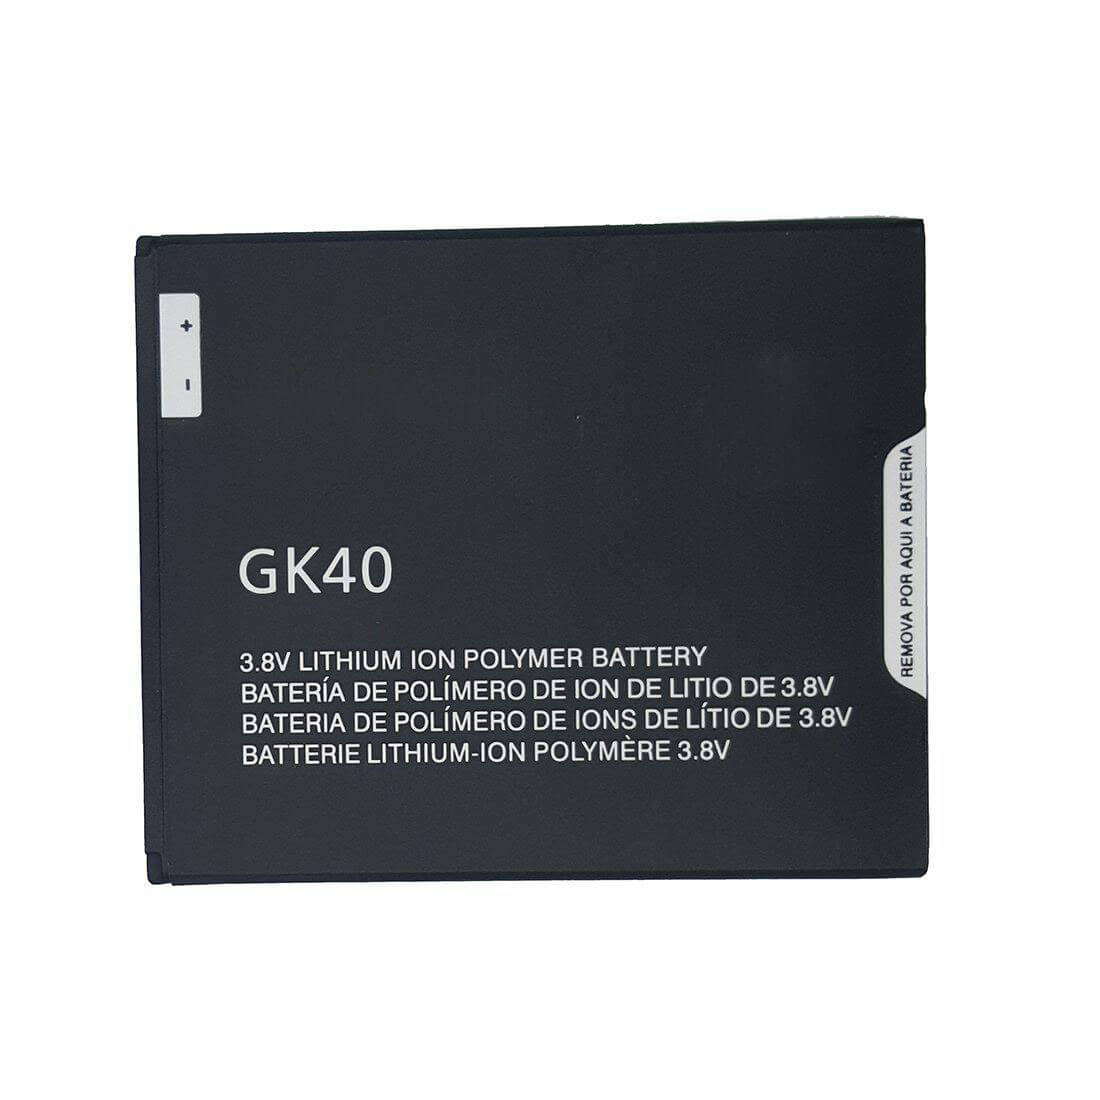 Replacement Battery For Motorola Moto G4 Play GK40